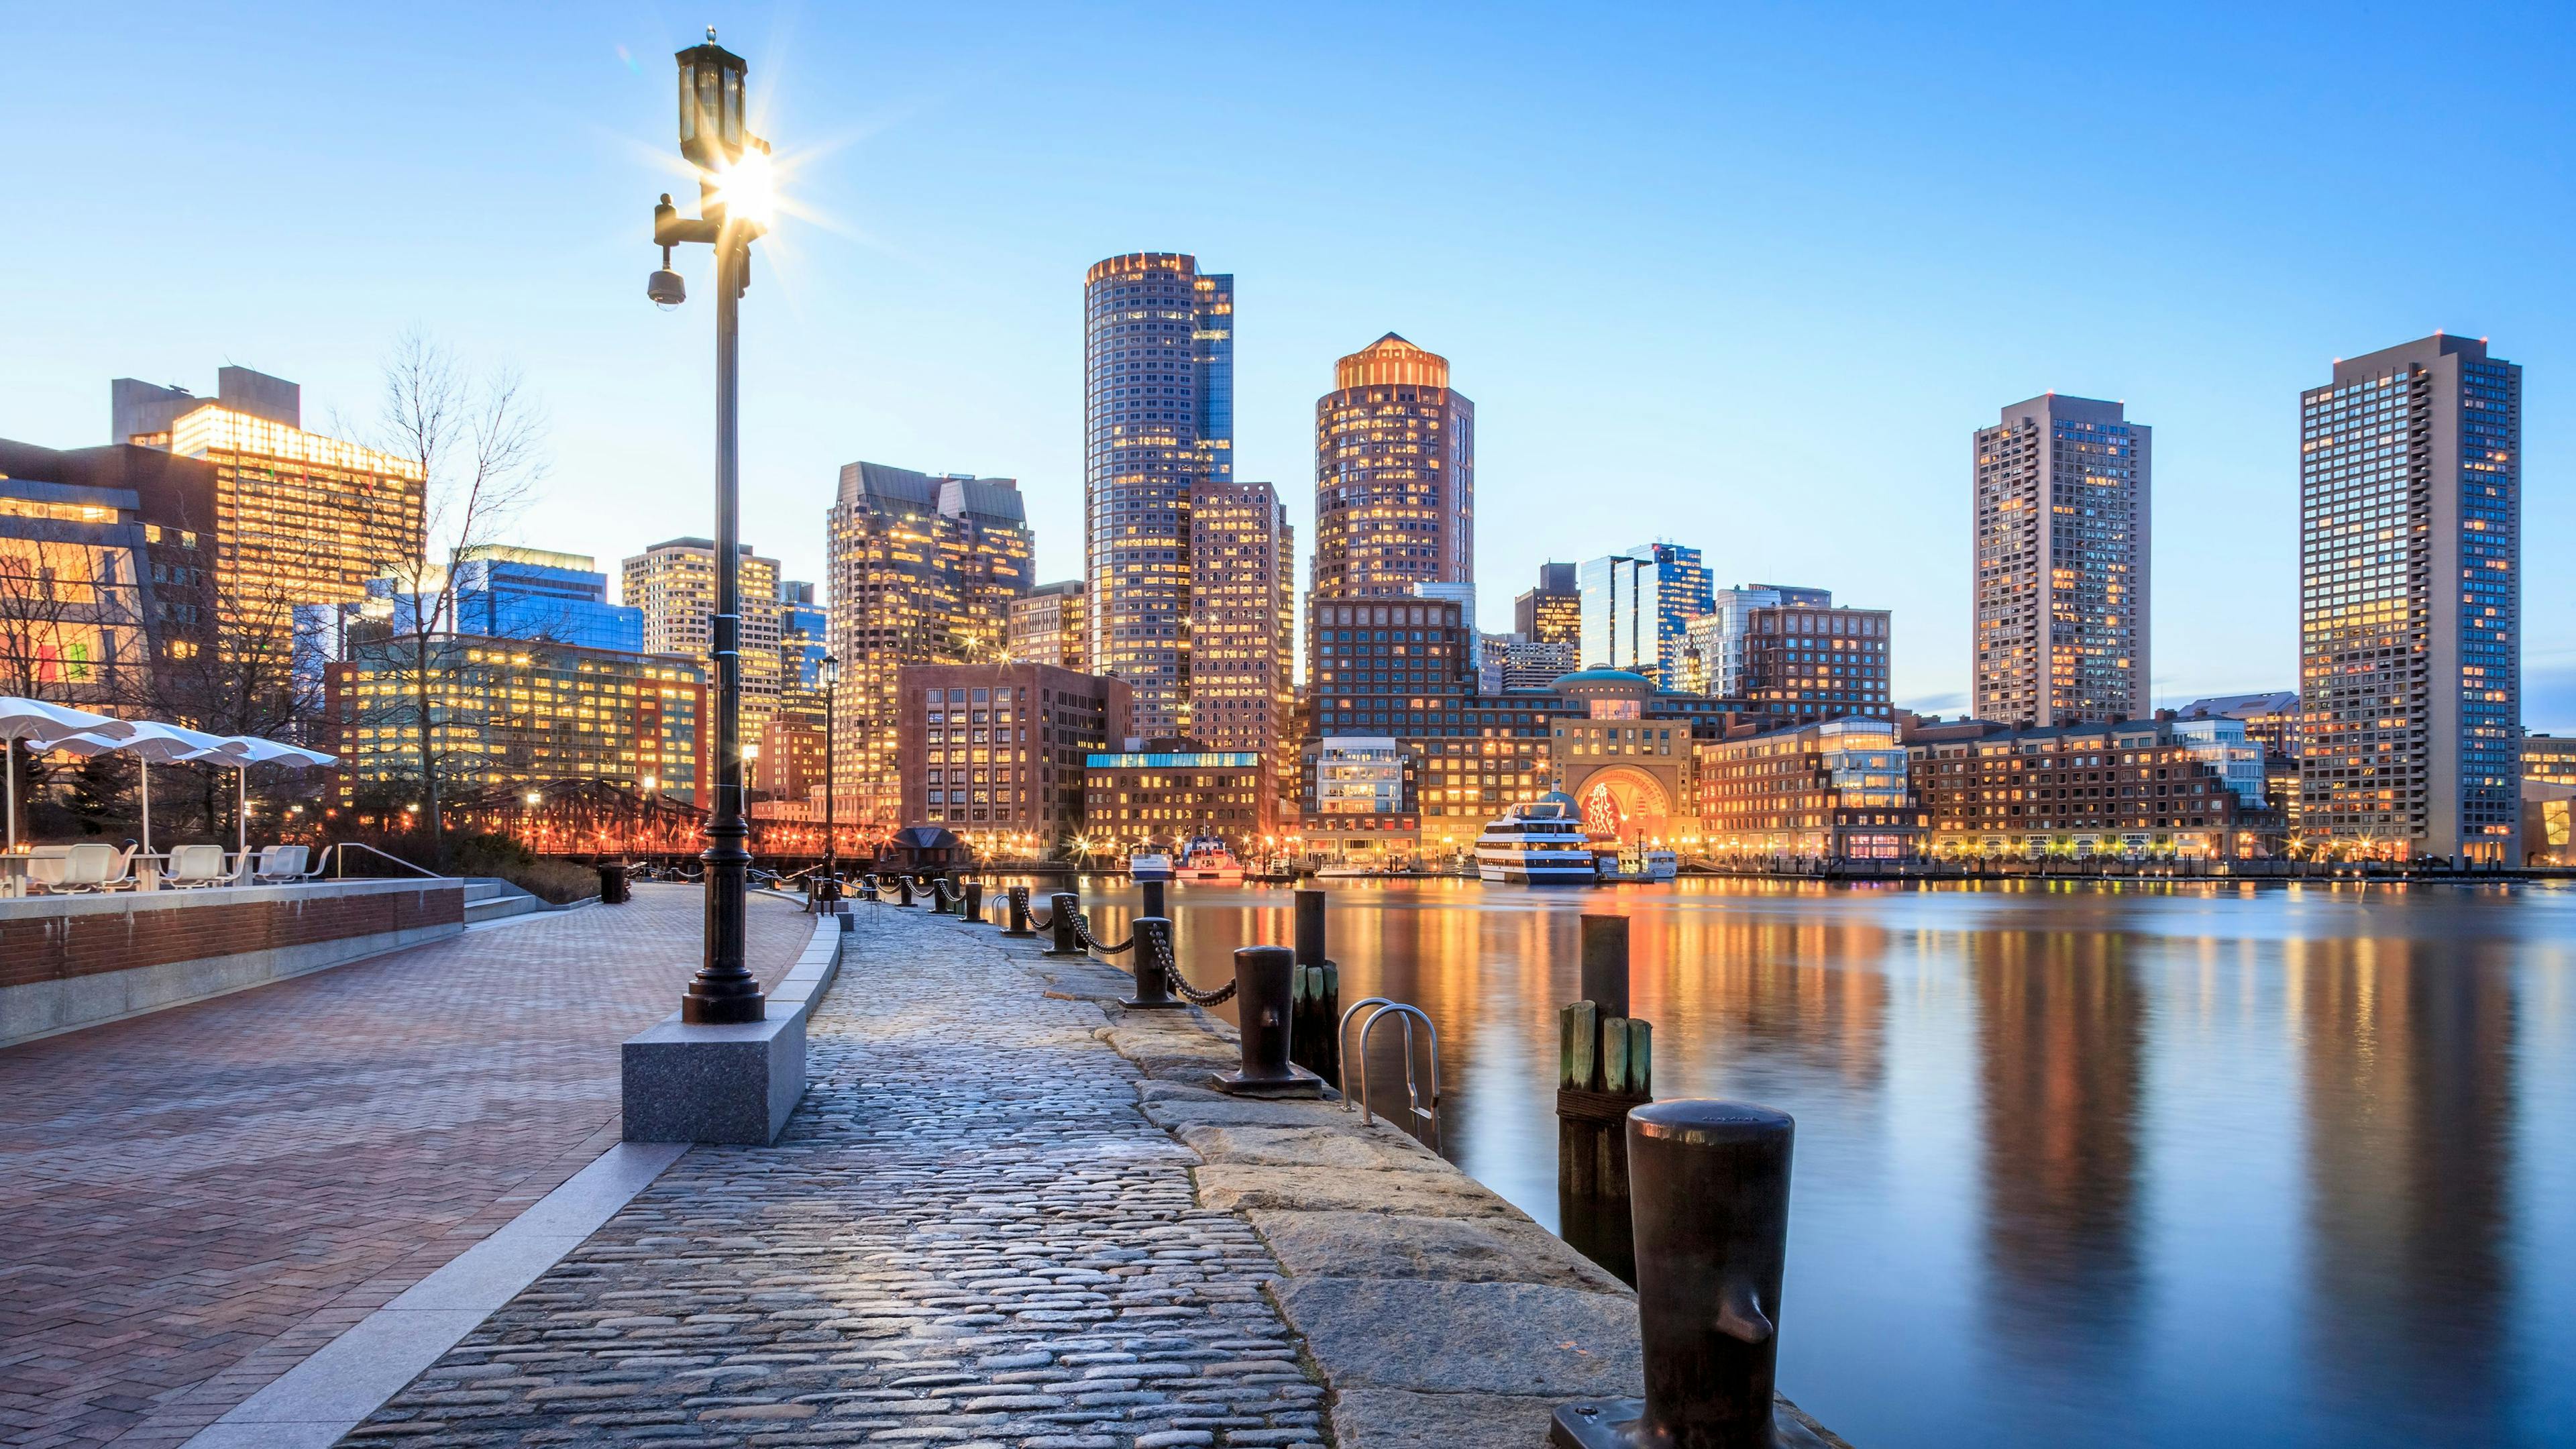 Plan Your Trip: What to do While Visiting Boston